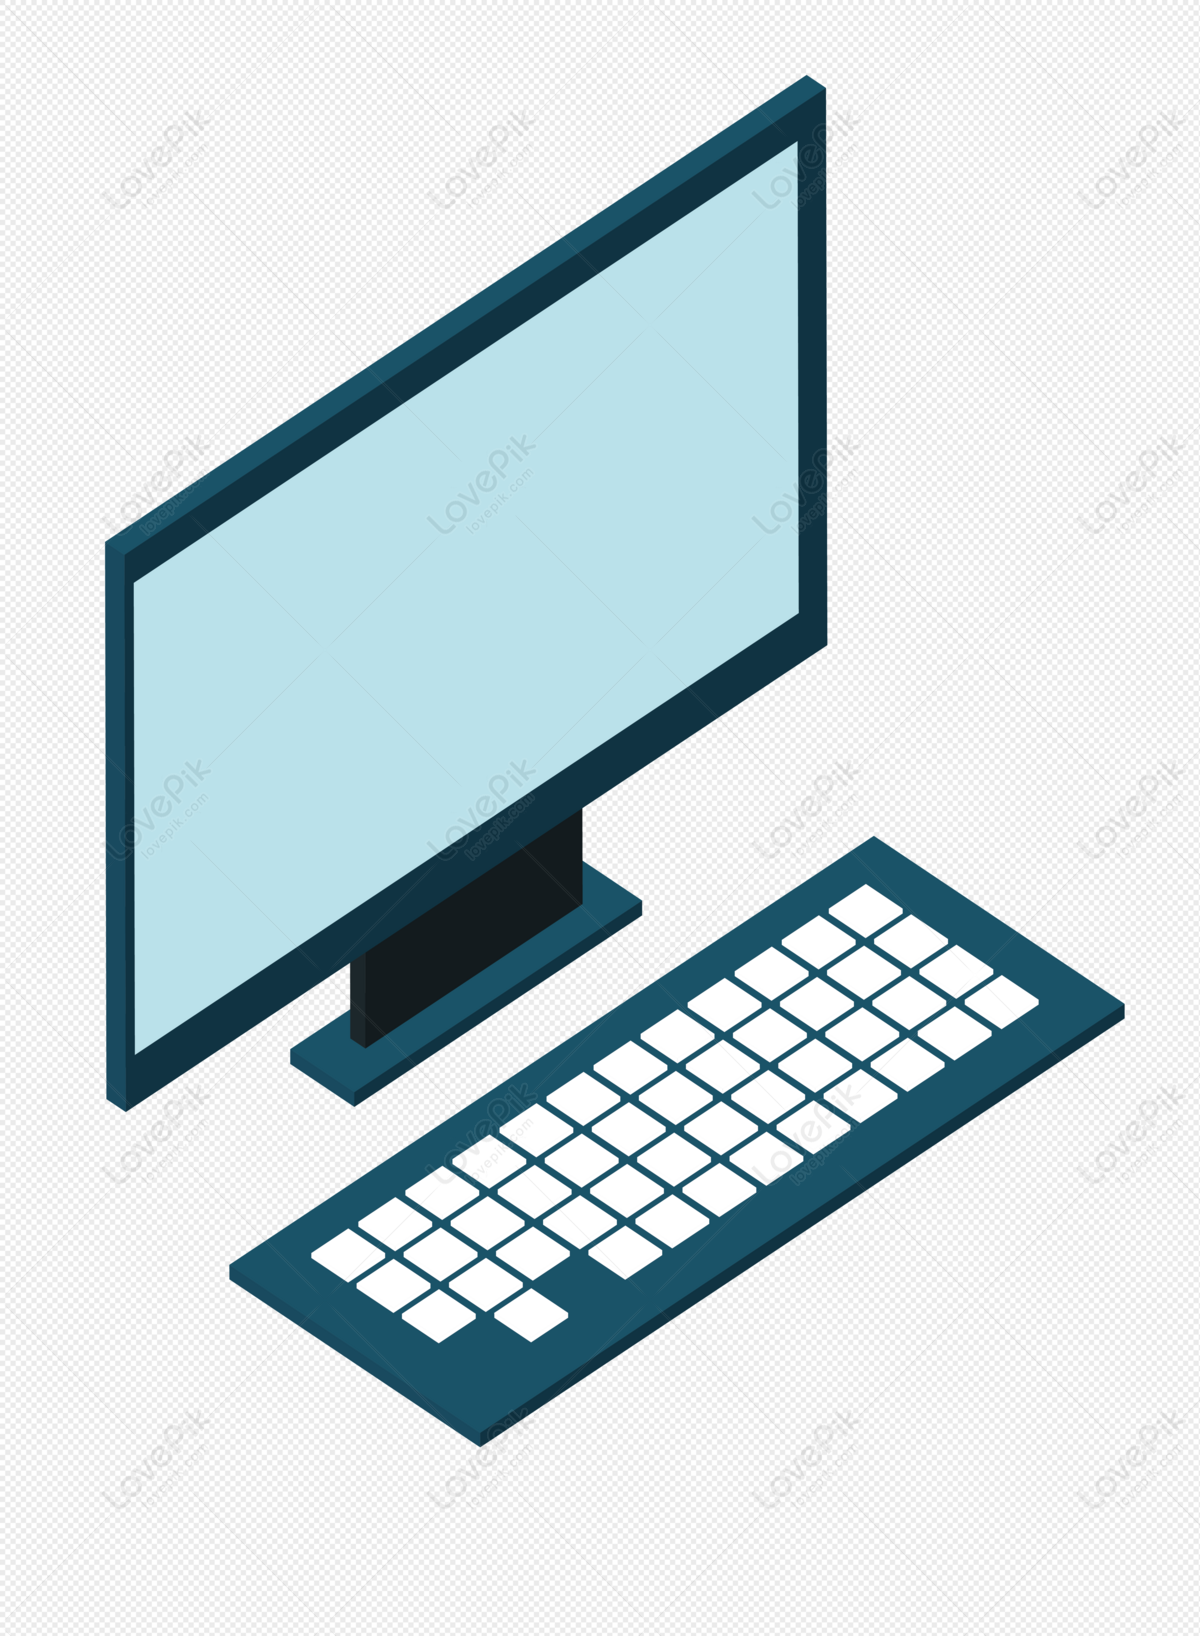 Play Computer Games PNG Transparent Images Free Download, Vector Files